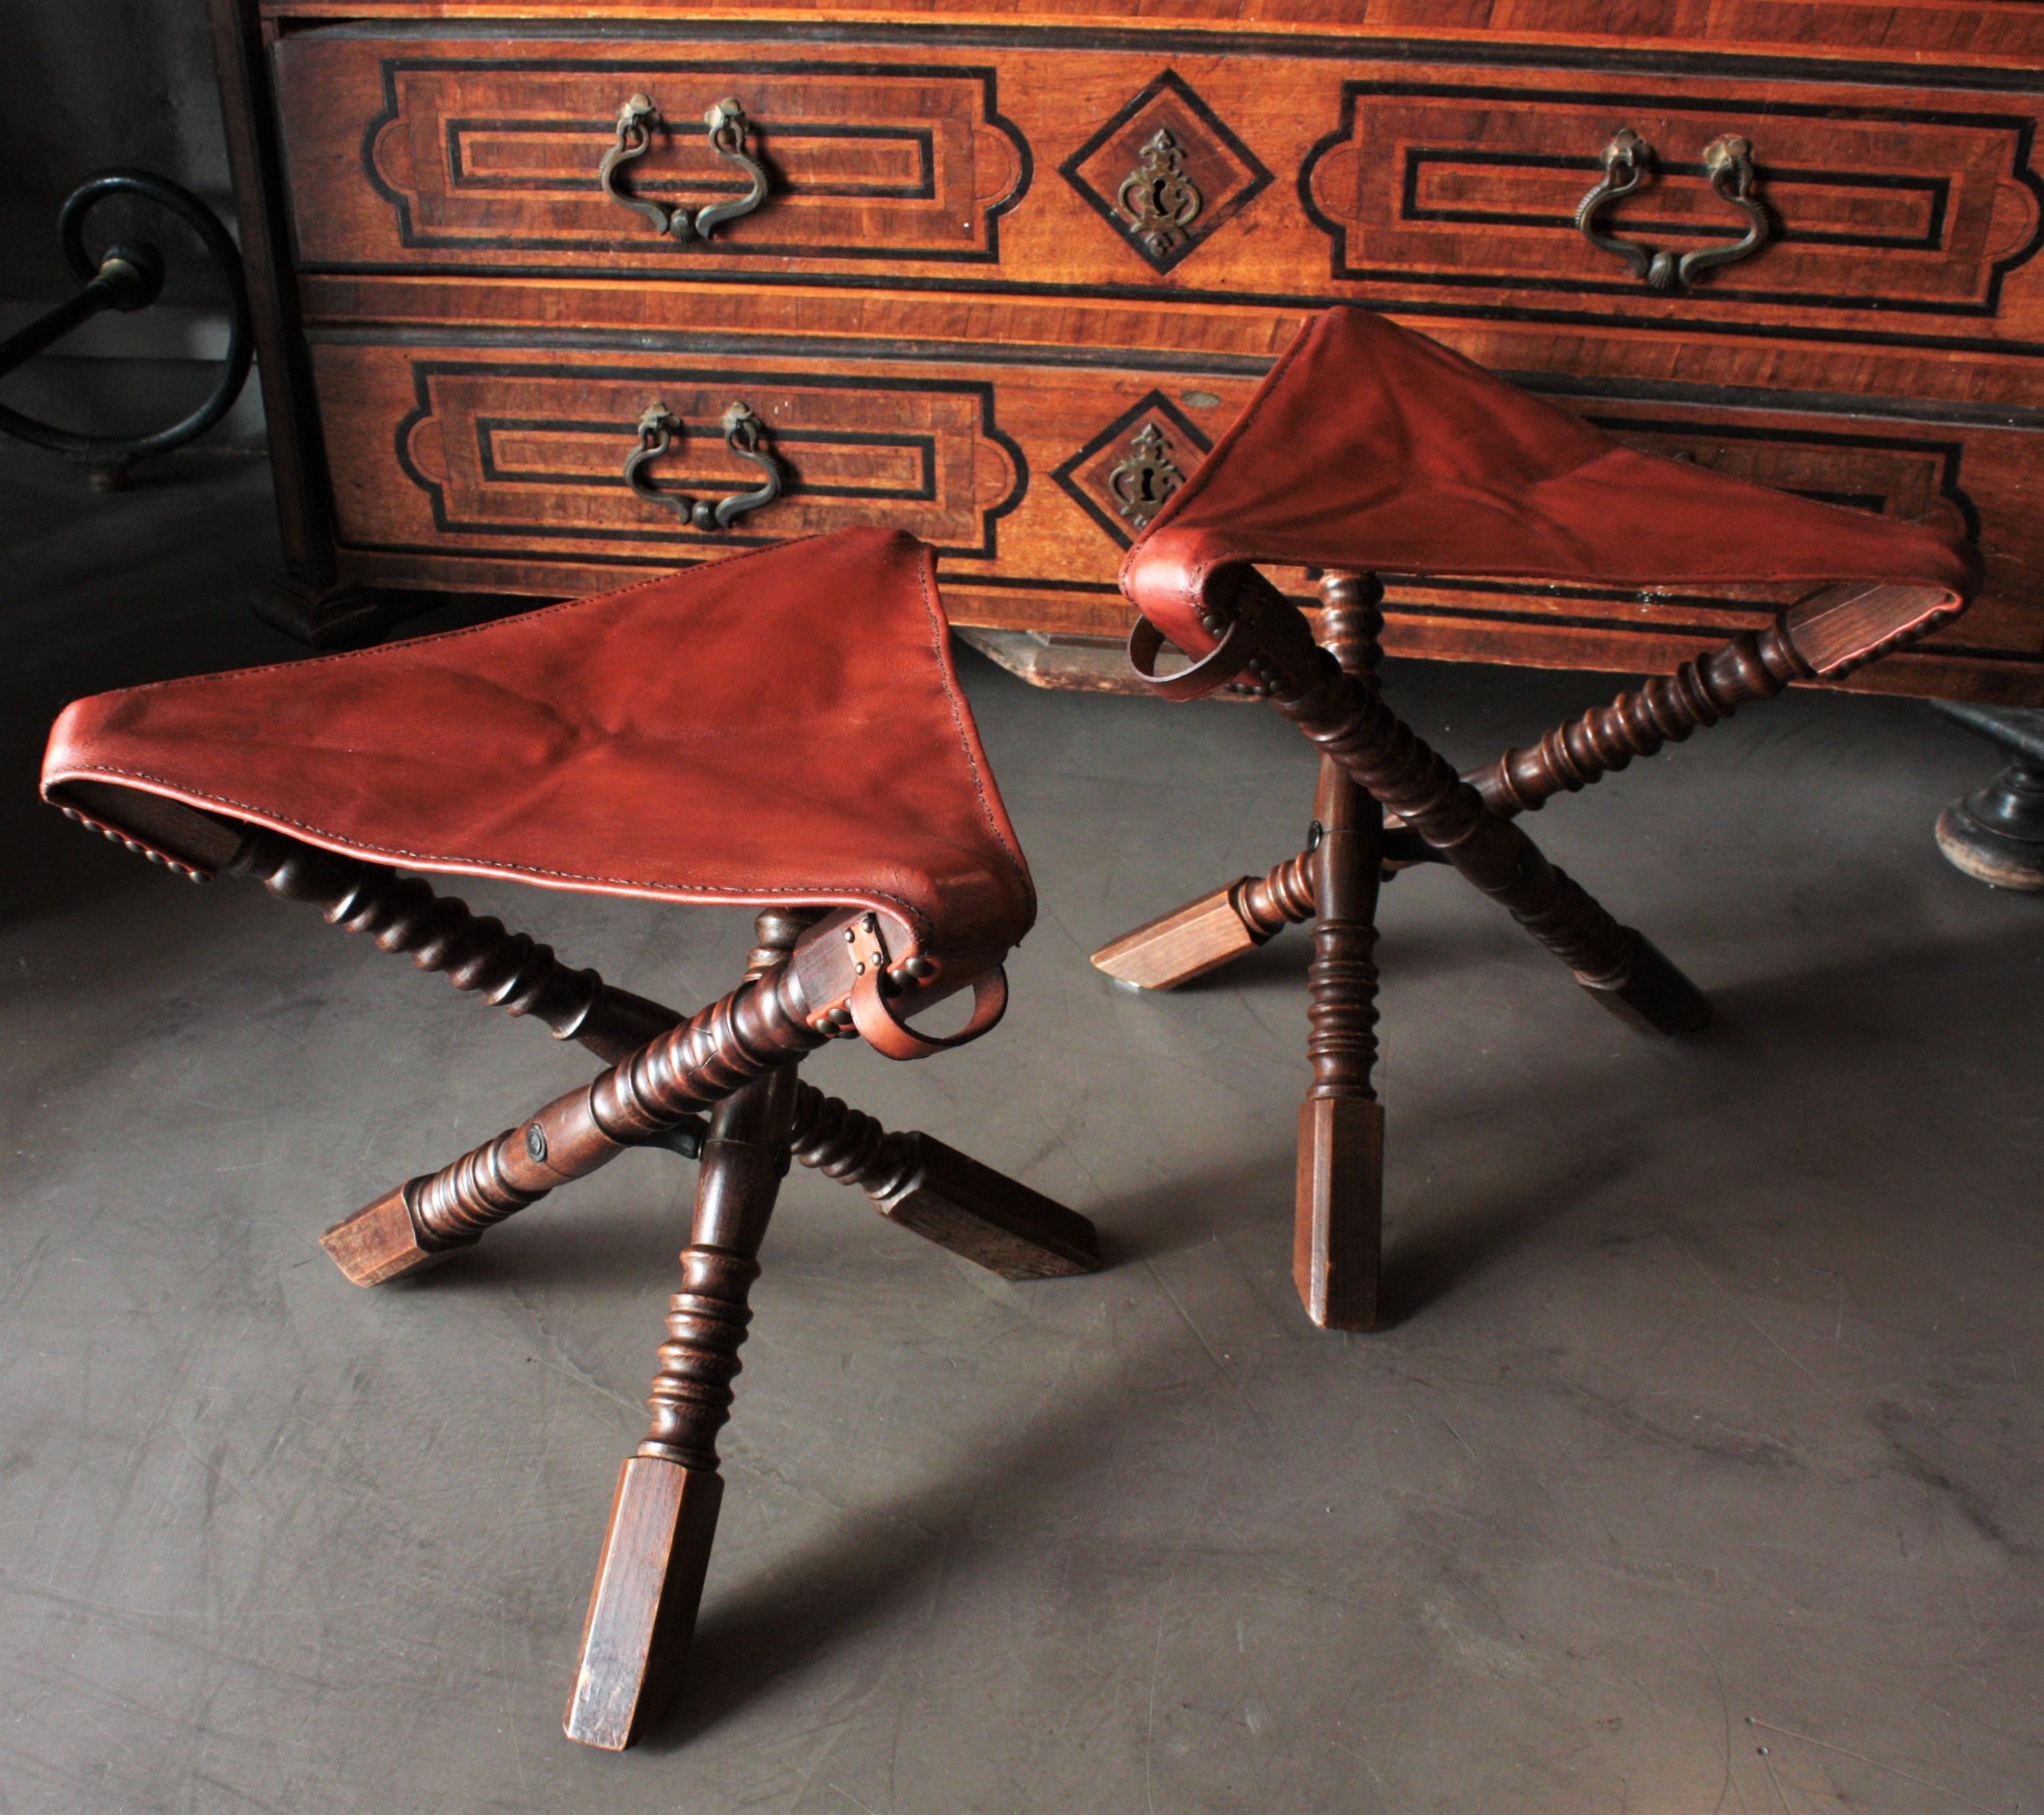 Elegant pair of turned oak Campaign tripod stools with leather folding seats. England, 1930s.
These folding stools feature a turned oak's wood tripod foldable structure. They have a leather triangle shaped seat and a leather handle in one